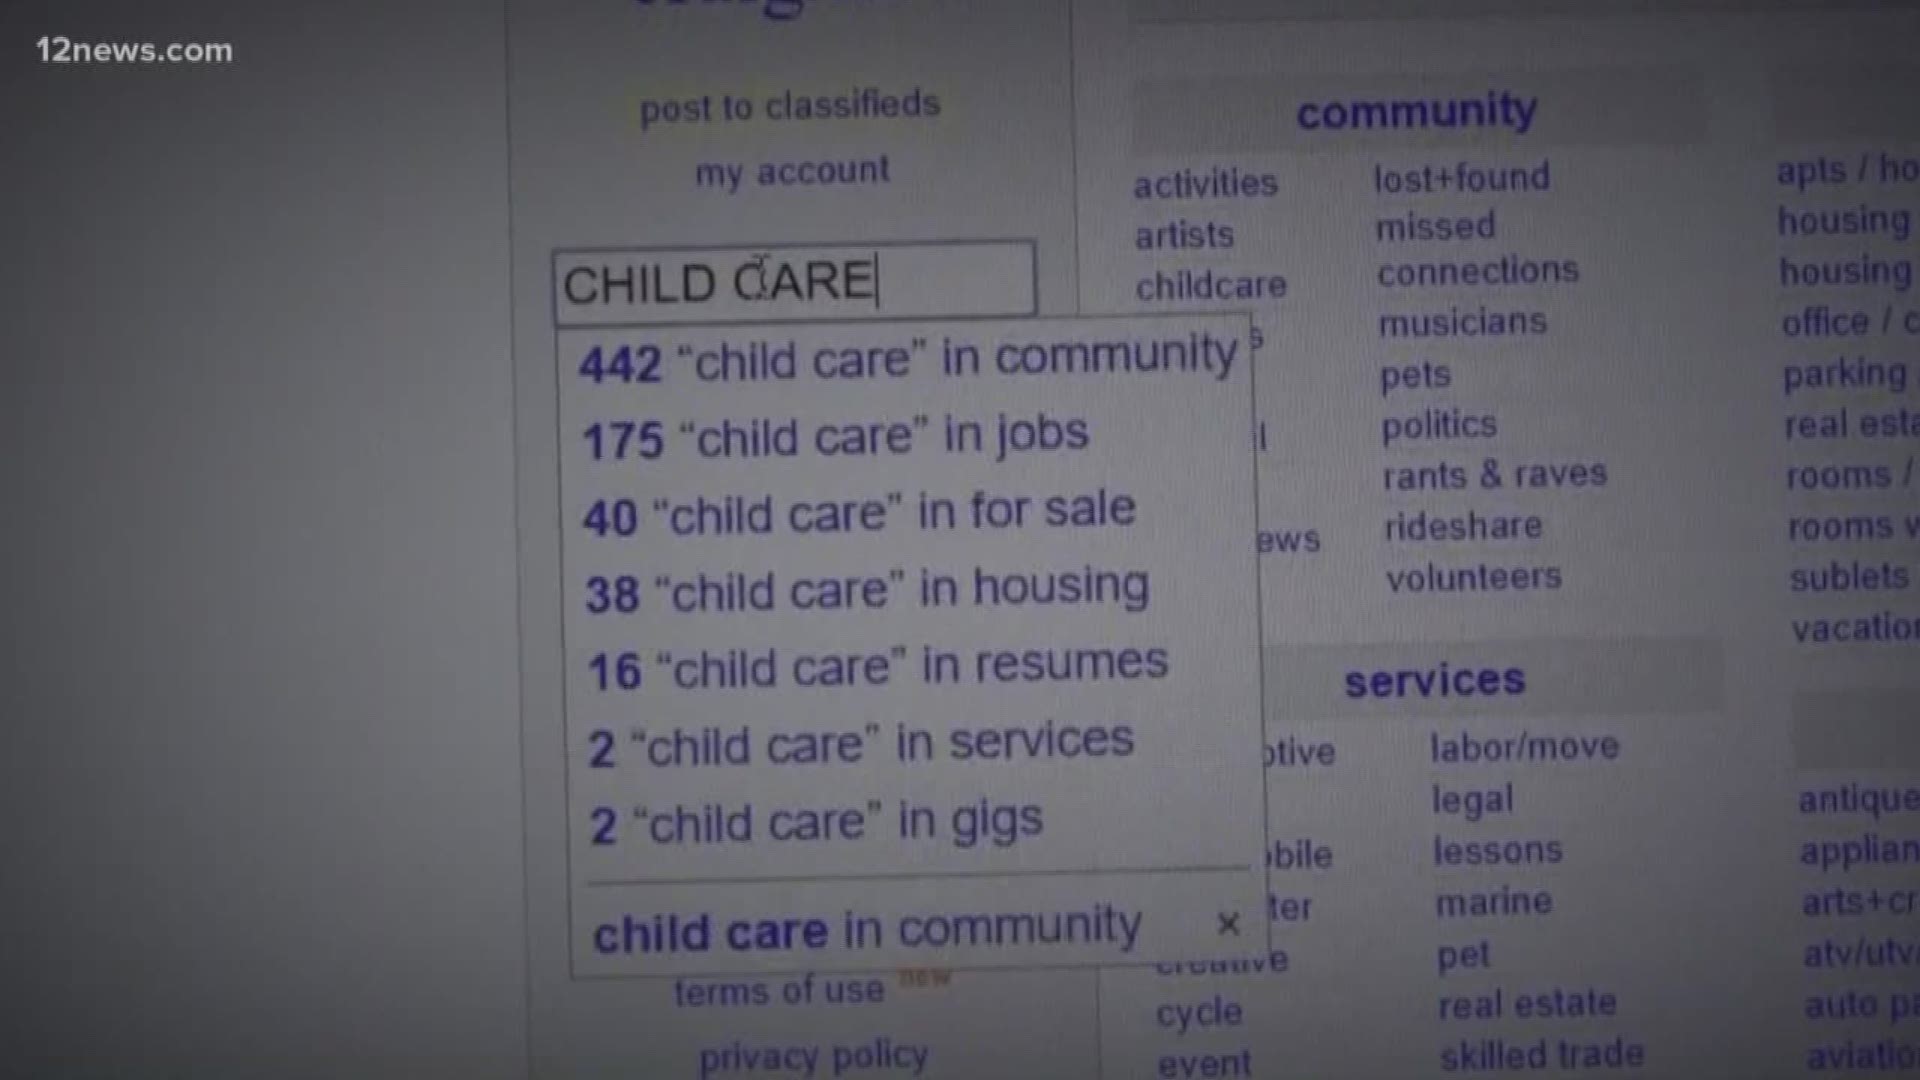 A quick search of the website Craigslist shows a large spike in ads for private child care since the strike was announced. Many of the ads even specify the idea of a greater need due to the walkout.